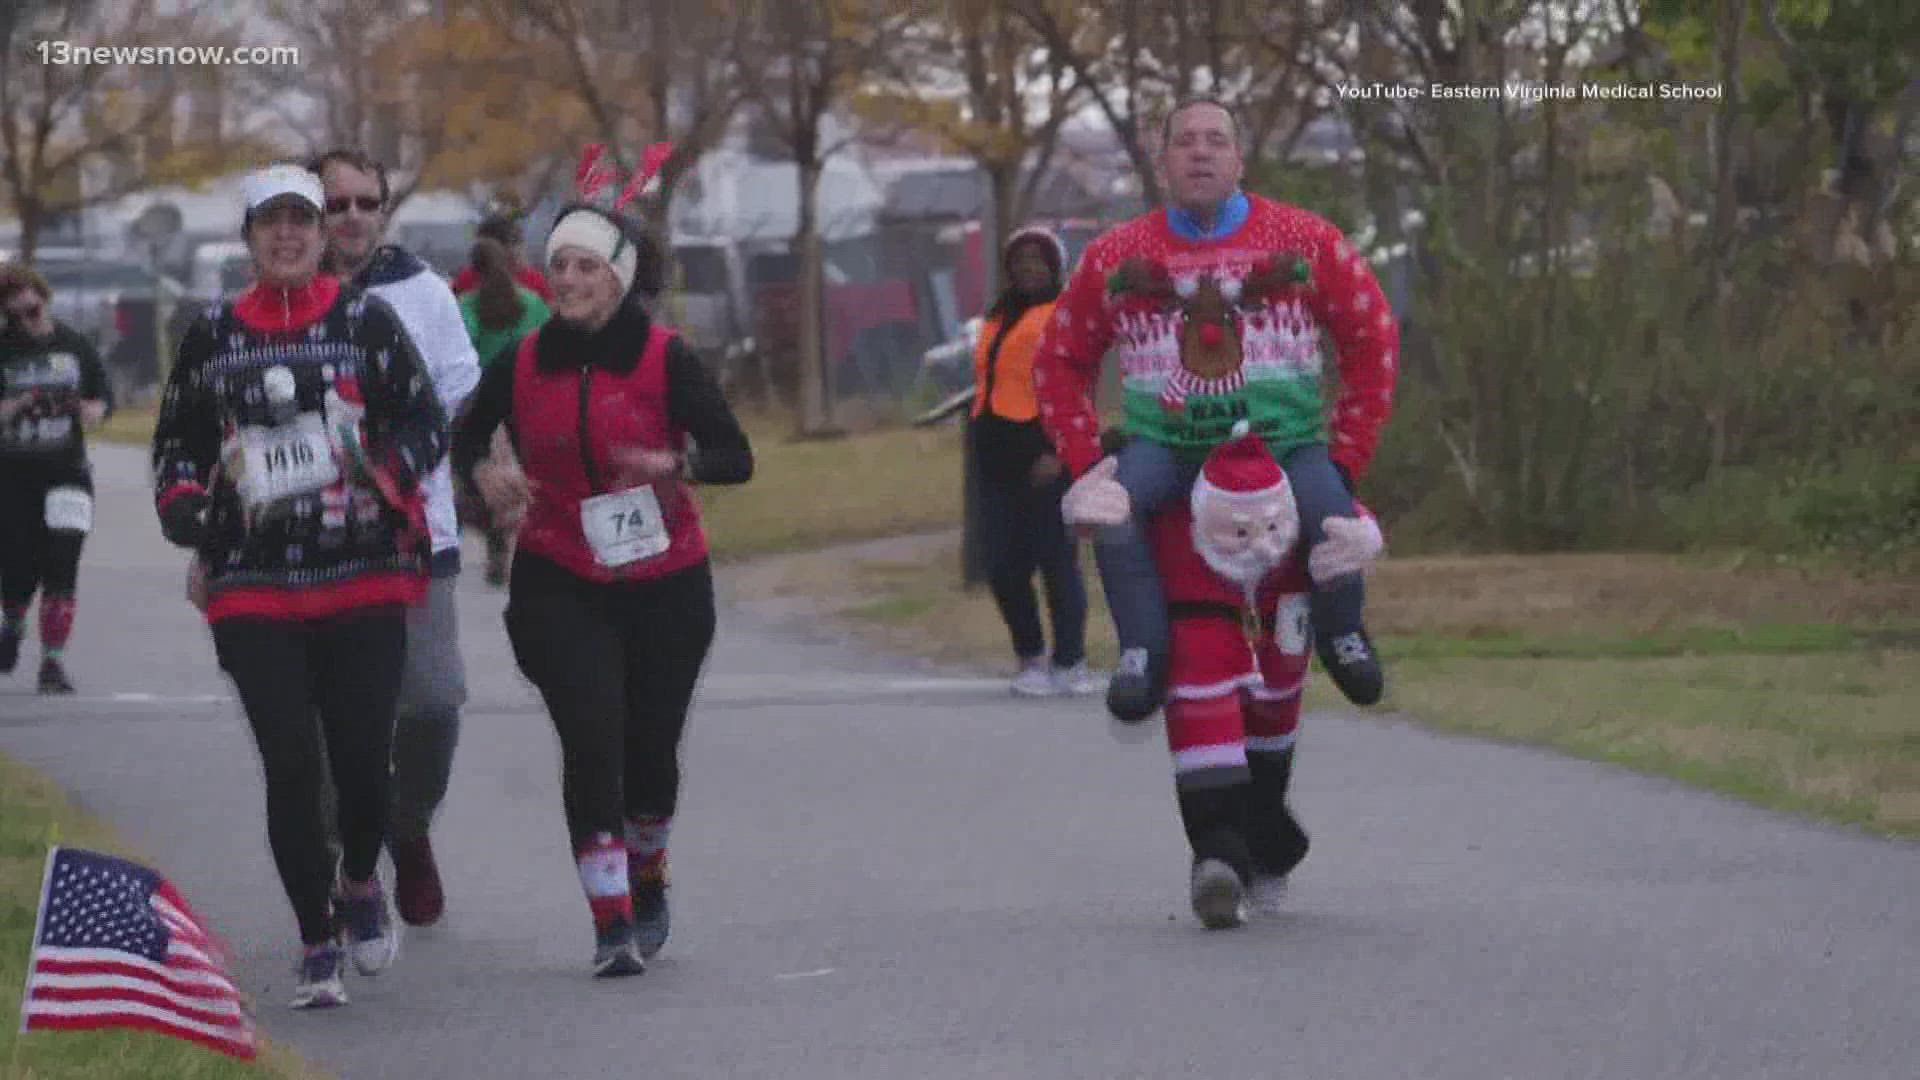 The Tacky Sweater 5K will benefit melanoma research and education at EVMS.